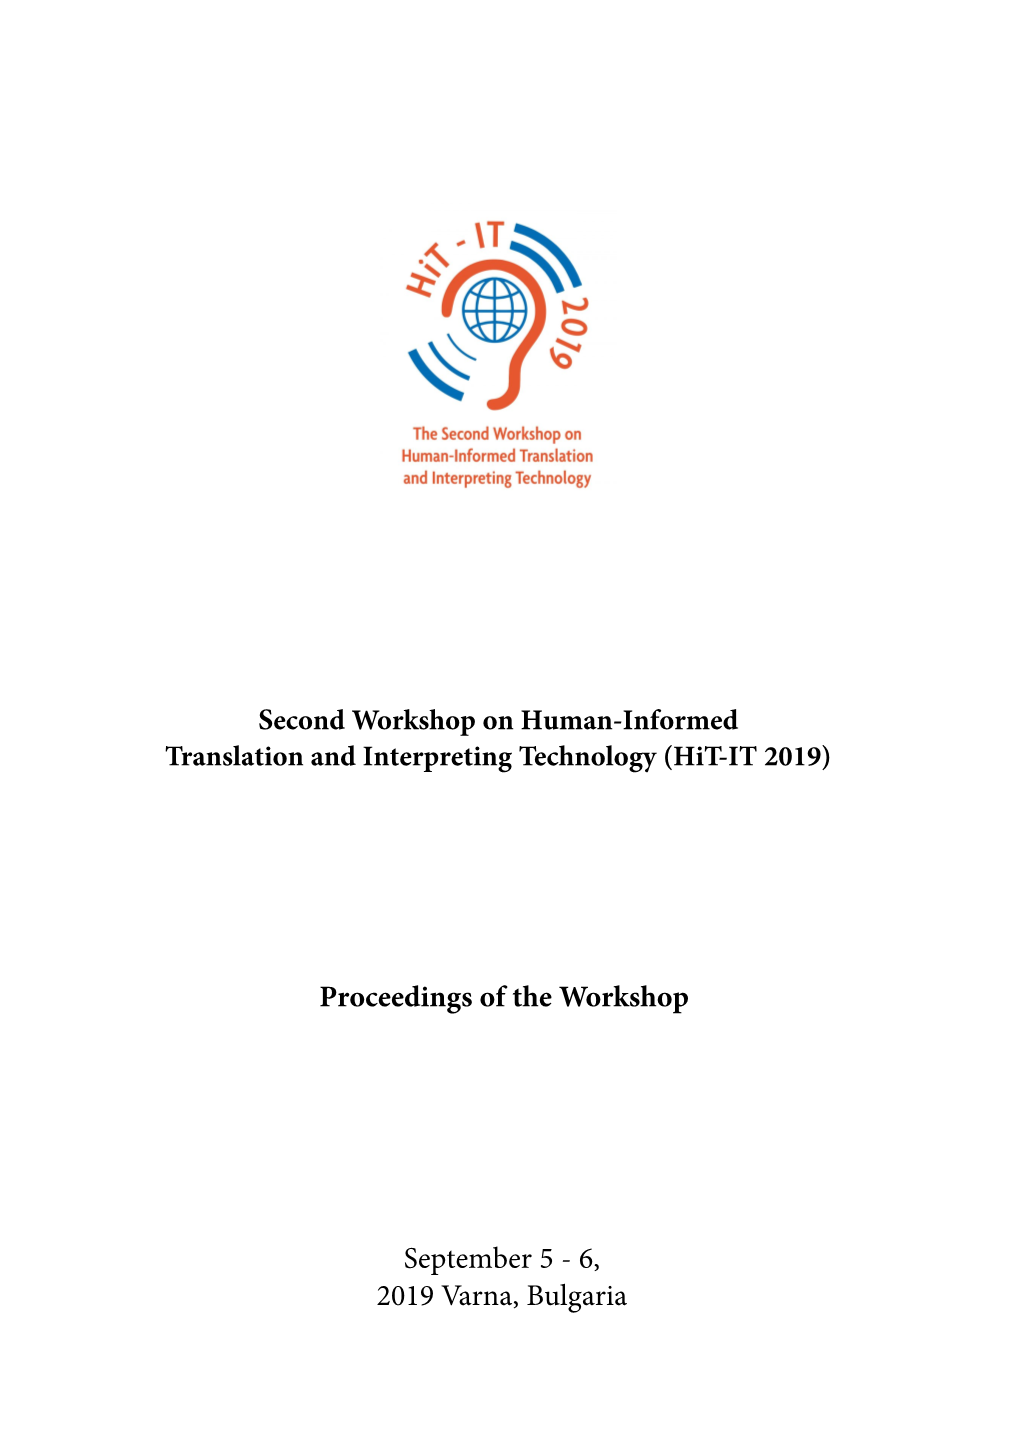 Proceedings of the 2Nd Workshop on Human-Informed Translation and Interpreting Technology (Hit-IT 2019), Varna, Bulgaria, September 5 - 6, Pages 1–10